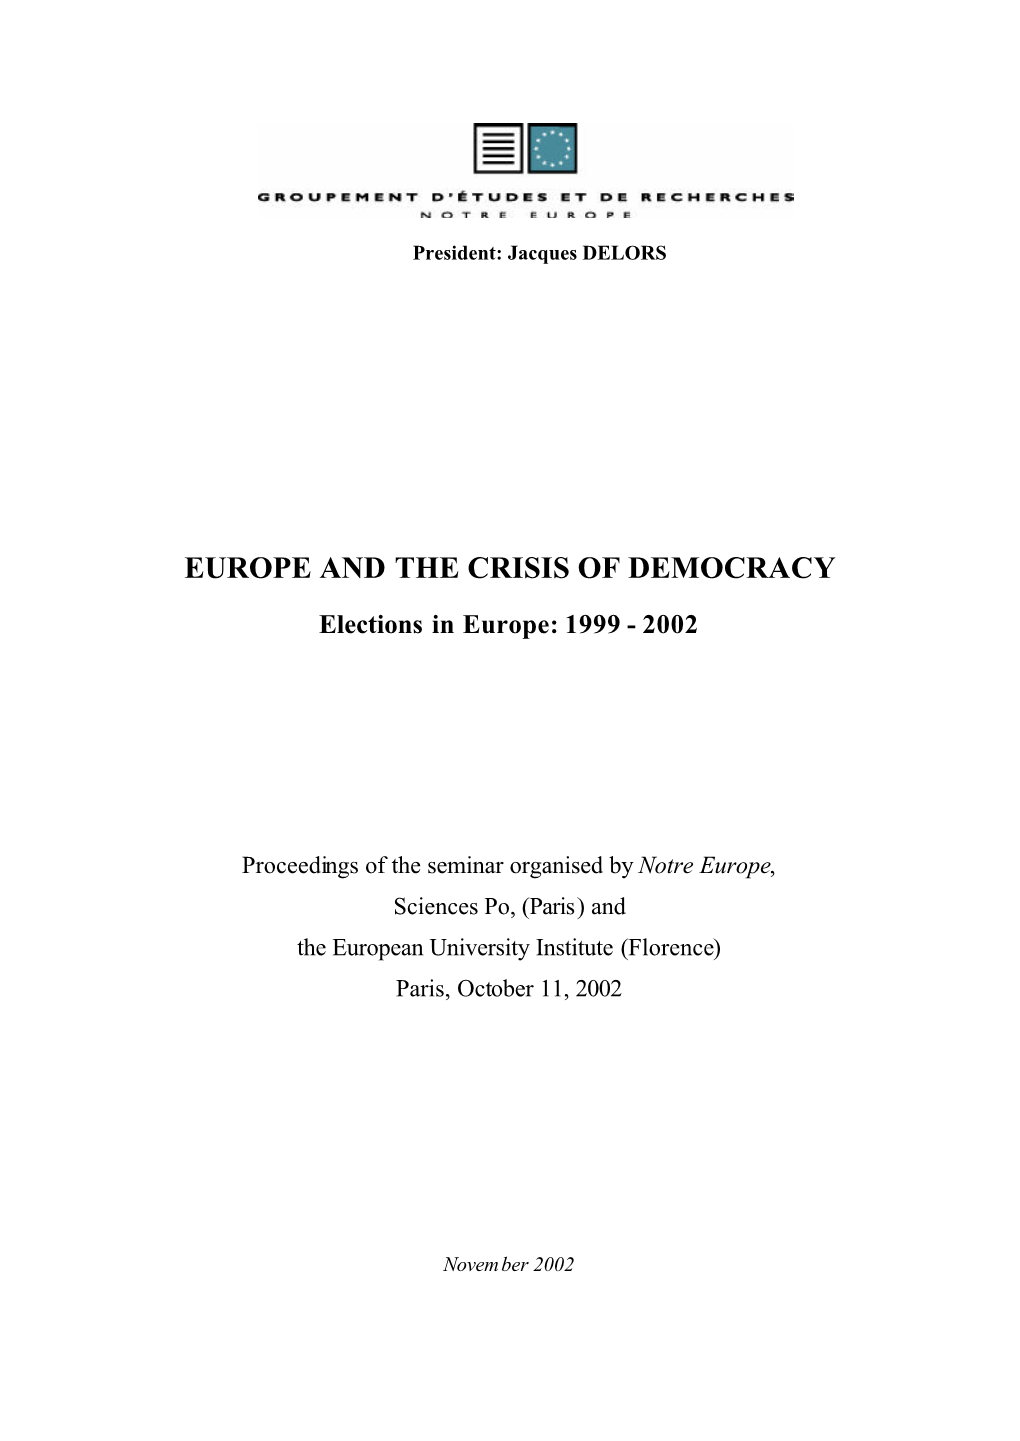 Europe and the Crisis of Democracy